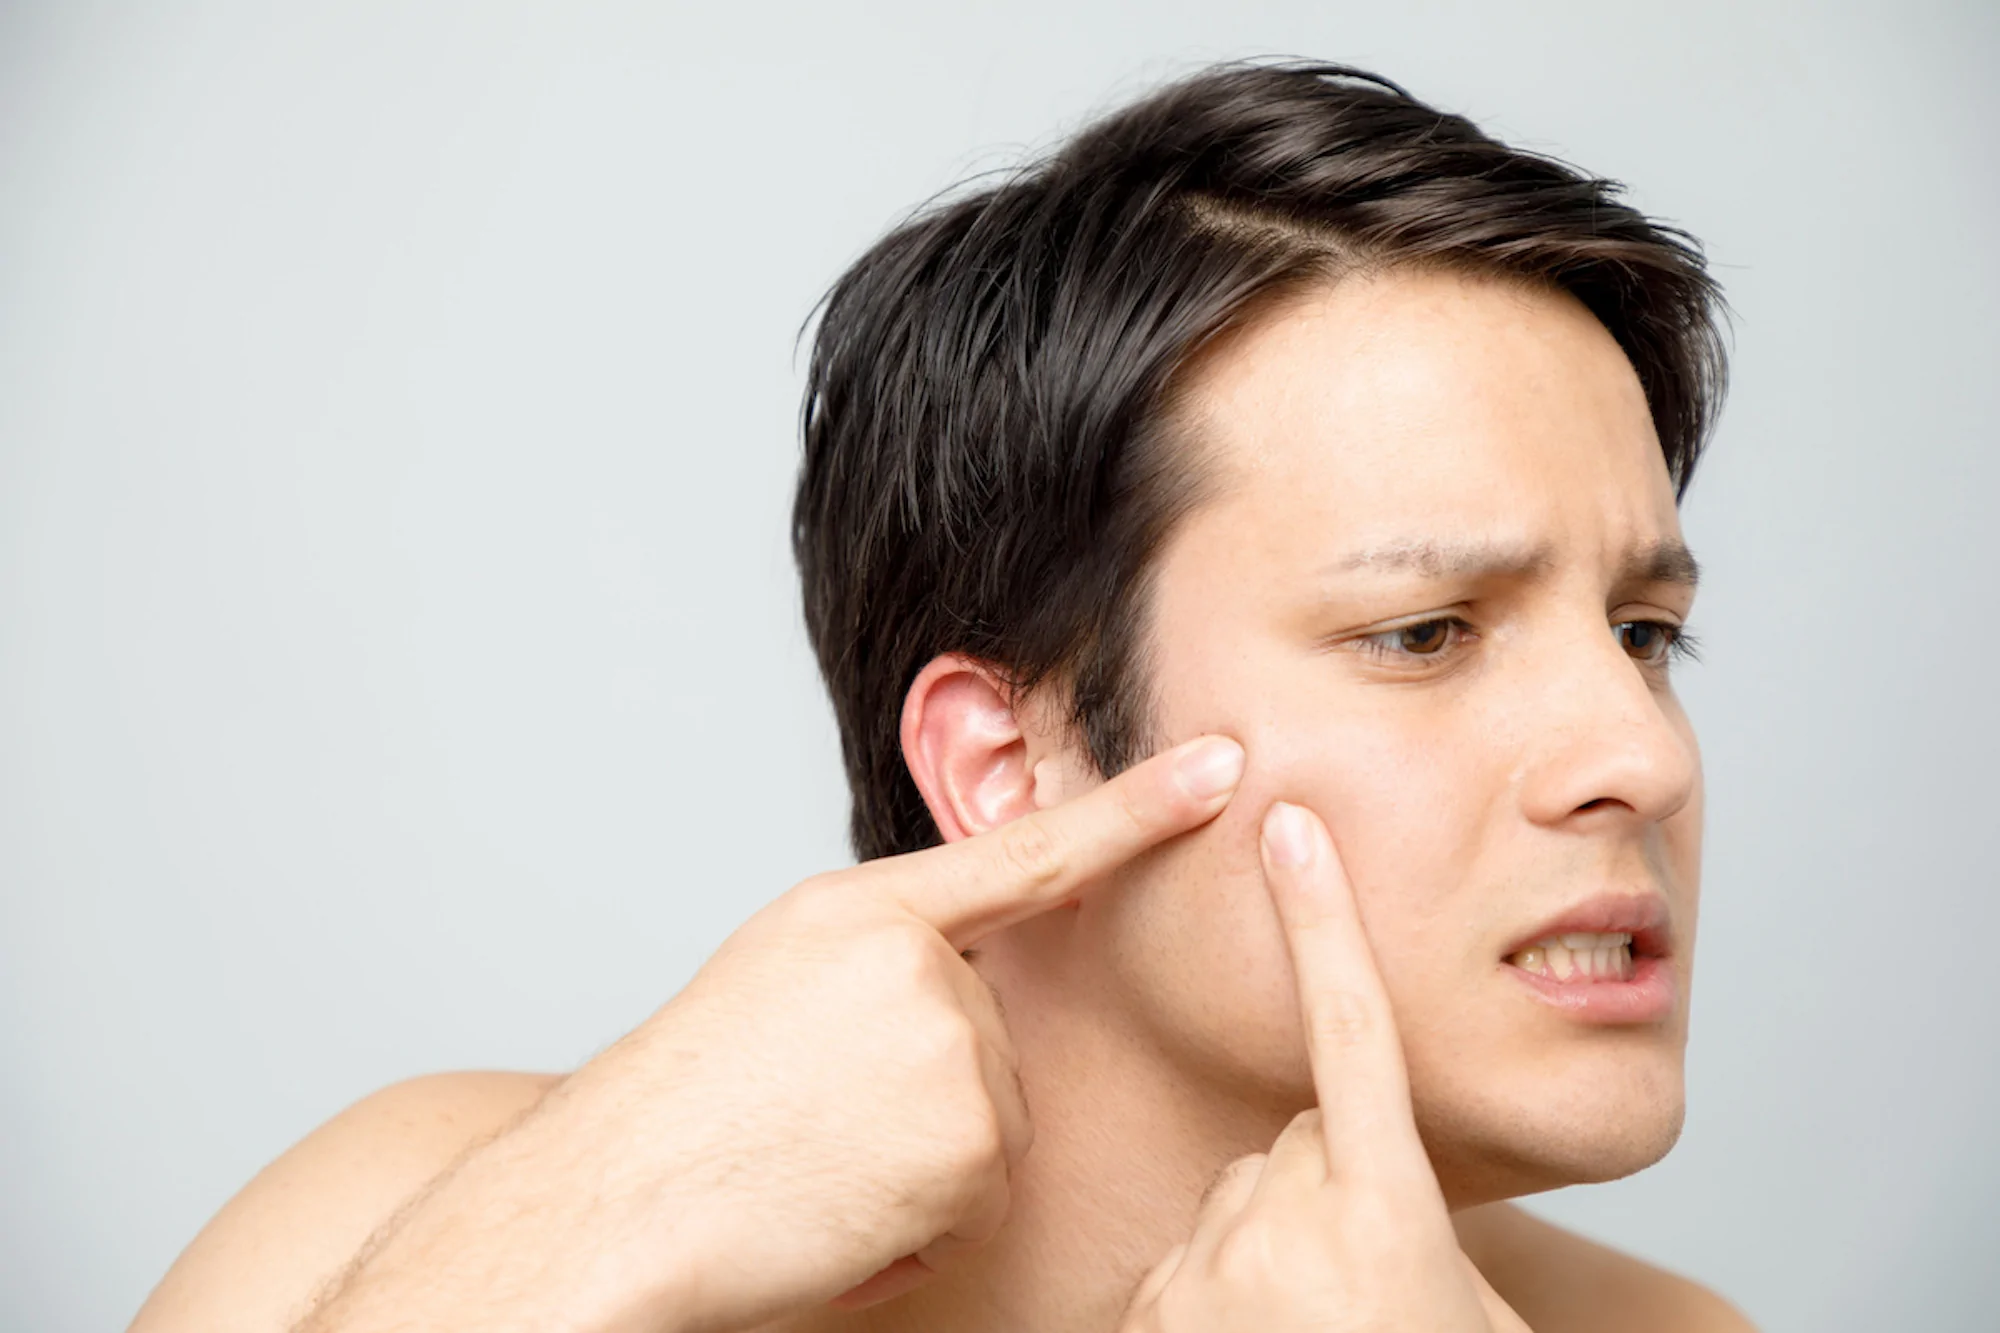 Why Do Pimples Hurt? Causes and Treatment